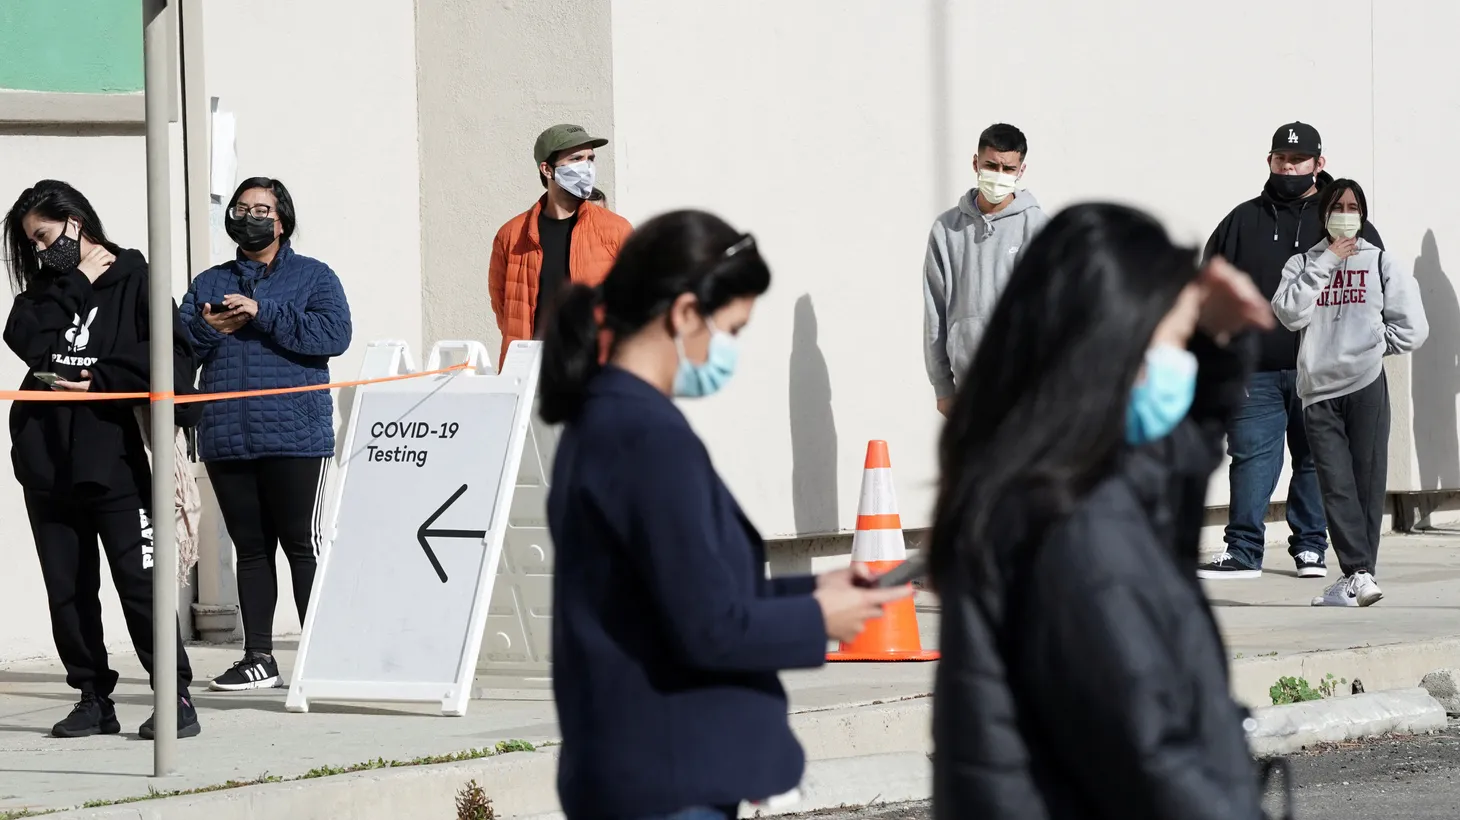 People queue in line at a coronavirus disease (COVID-19) testing site, as the Omicron variant threatens to increase case numbers after the Christmas holiday break, in the Lincoln Heights neighborhood of Los Angeles, California, U.S. December 27, 2021.